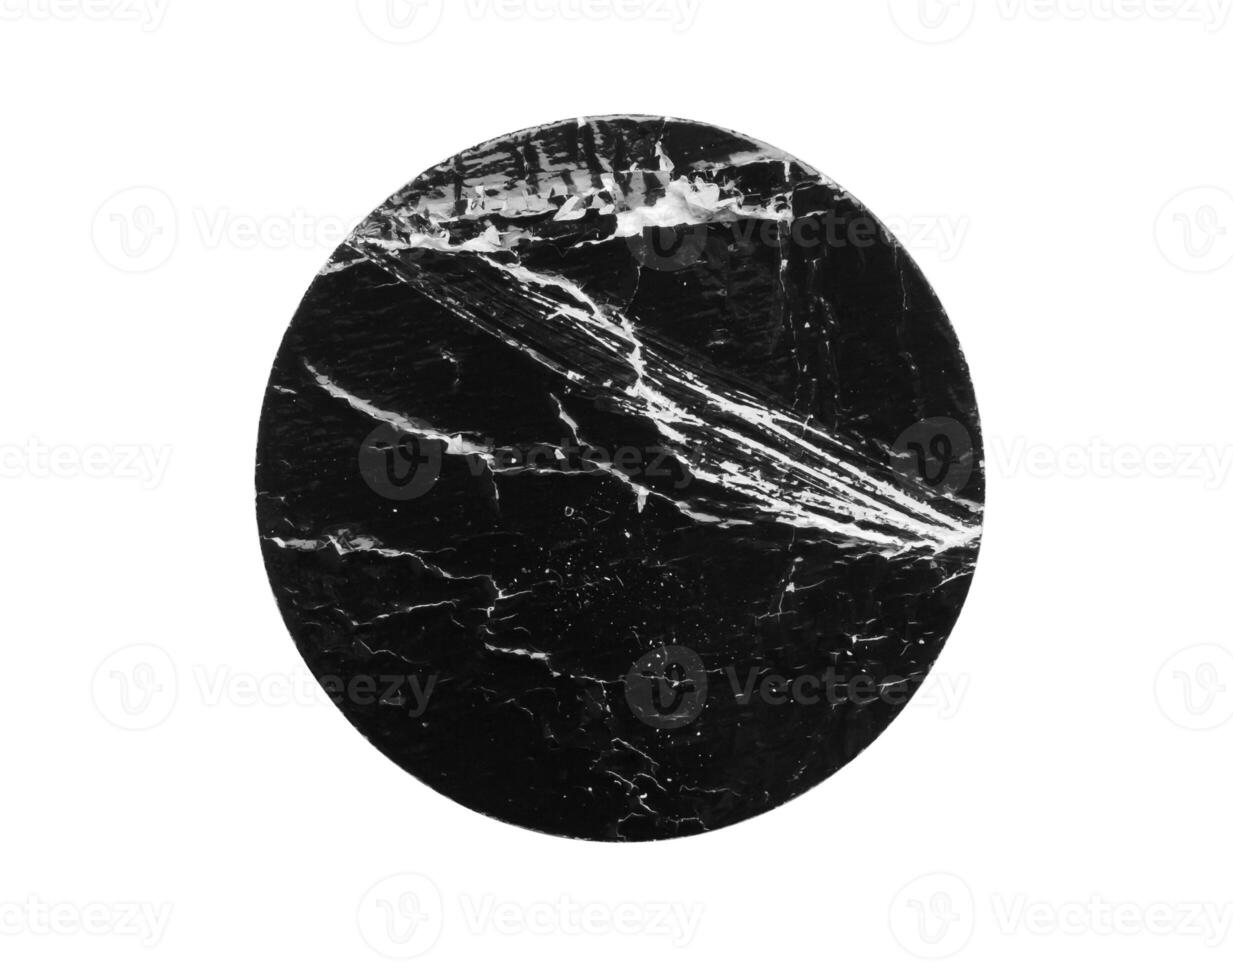 Black old scratched round paper sticker isolated on white background photo